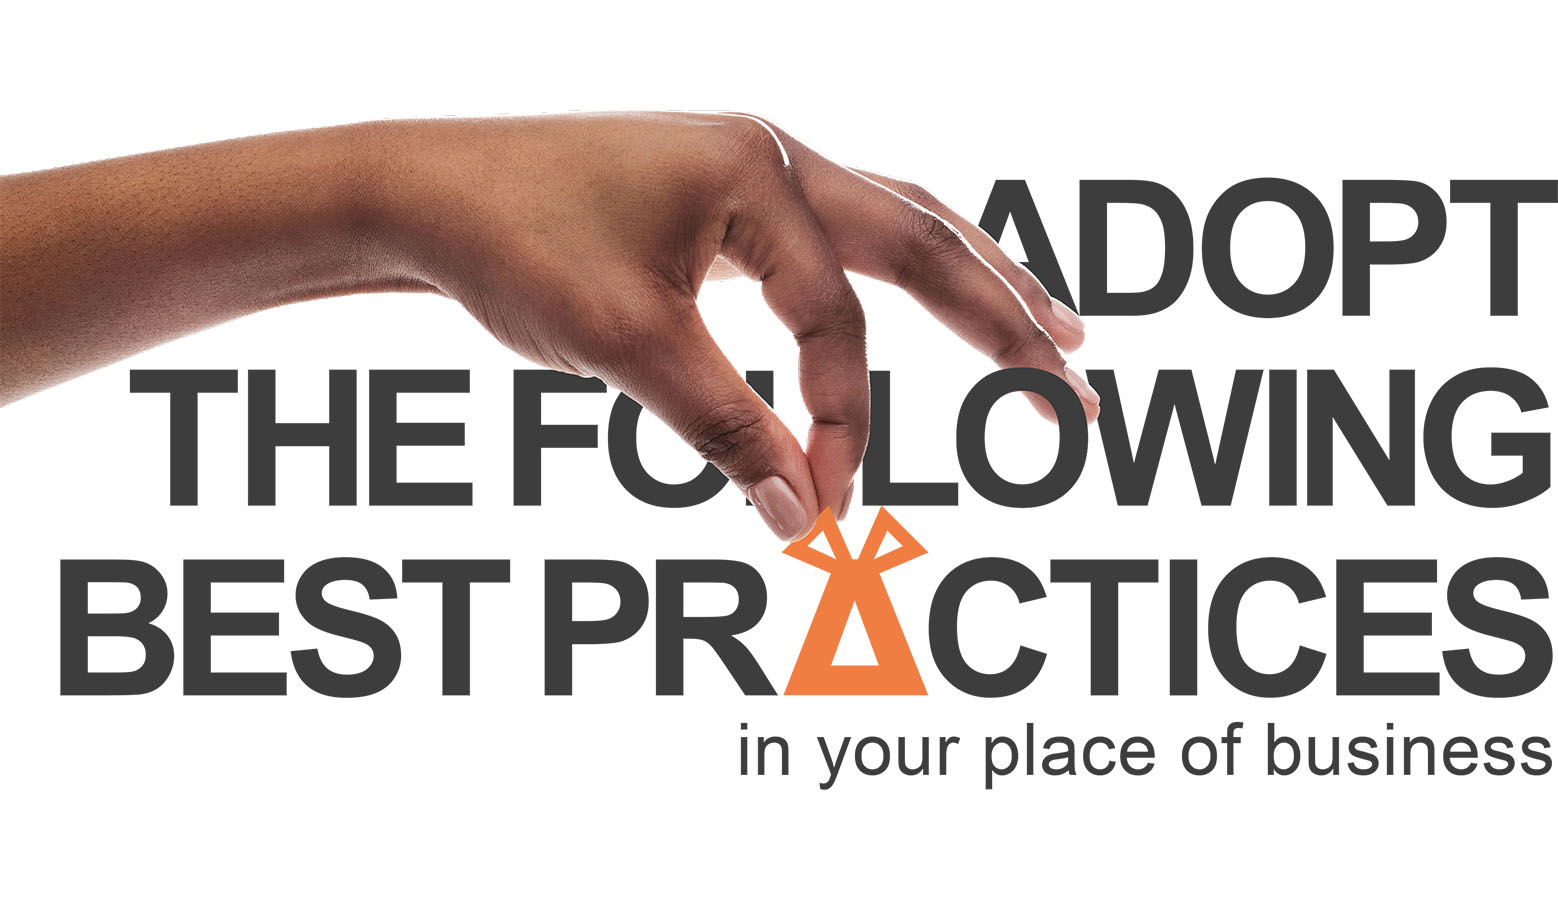 Adopt the following best practices in your place of business